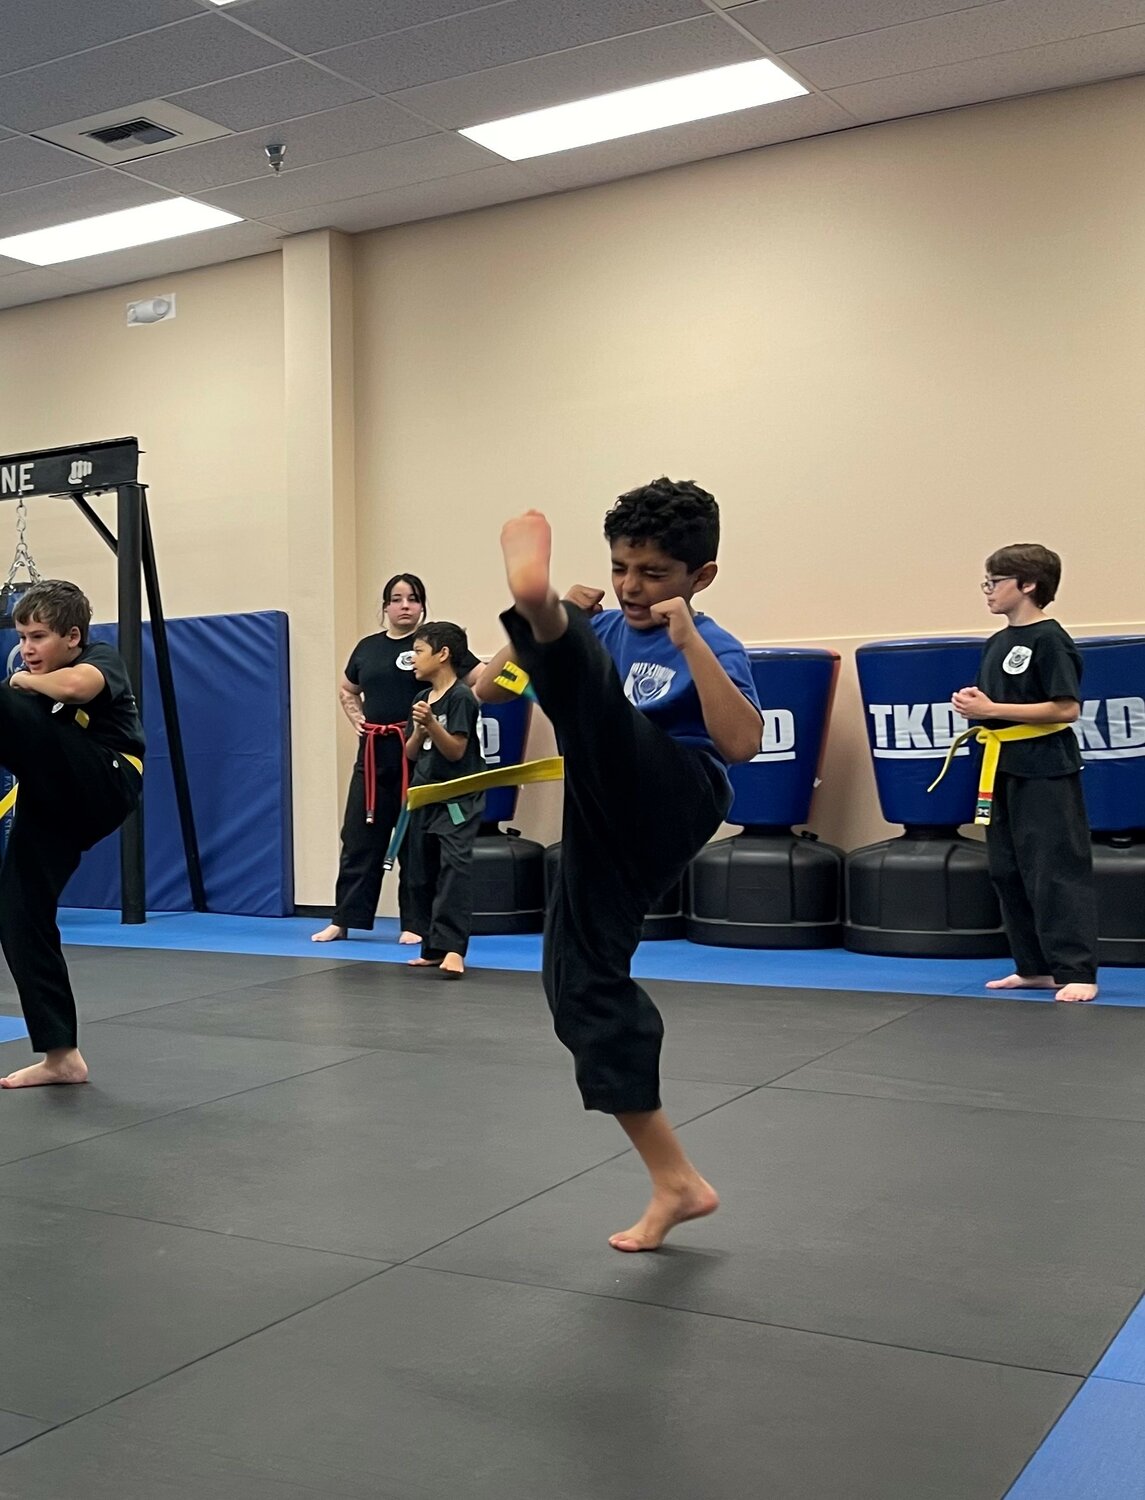 Maximum Martial Arts University has students ranging in age from 3 to 78.